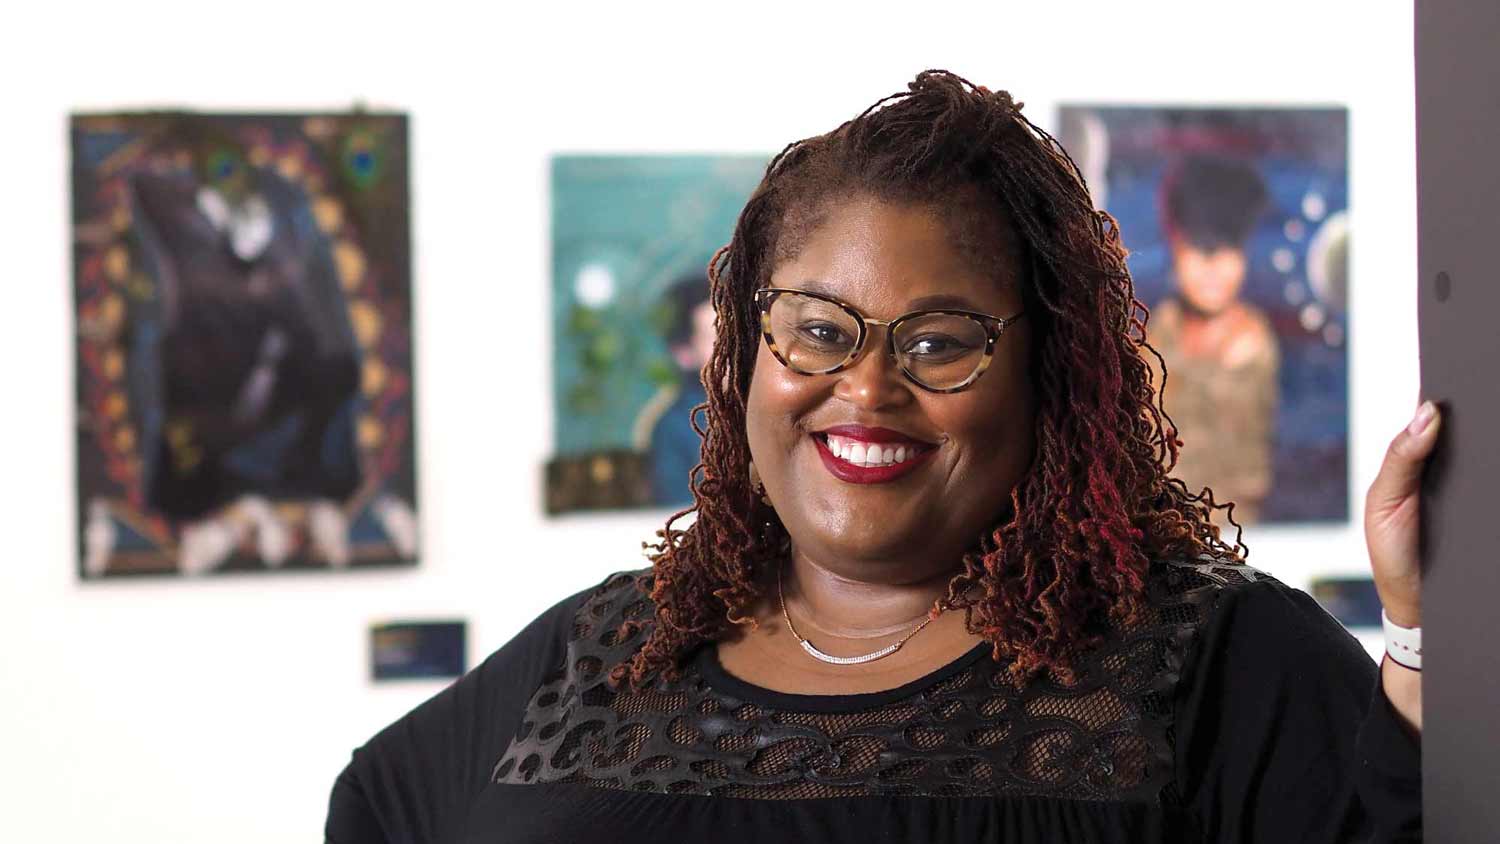 Photograph of Angela Gay at the African American Cultural Center